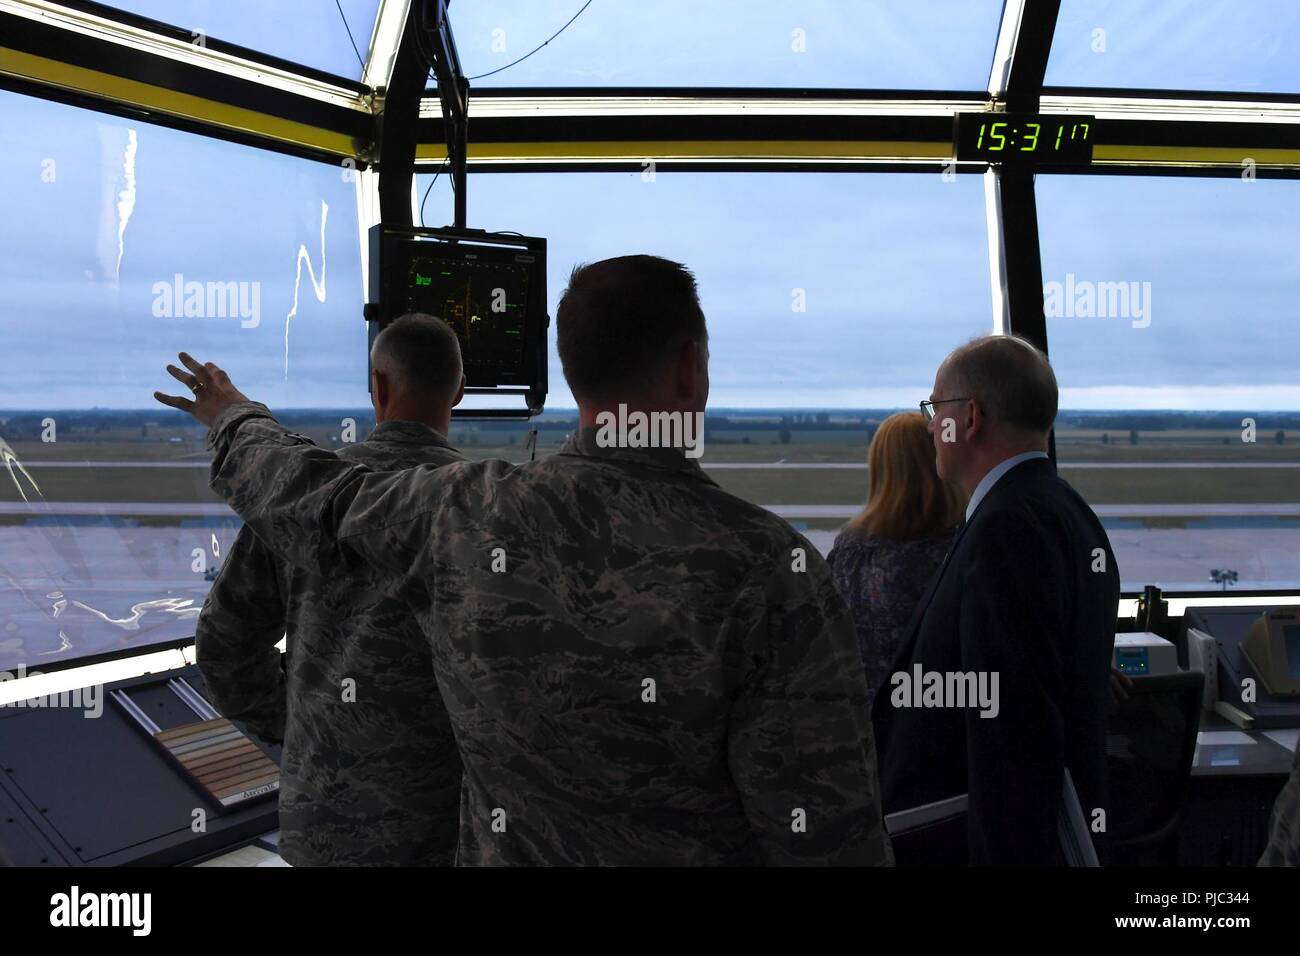 Dominic Pohl, 25th Air Force executive director, right, observes the base geography and flight line through the air traffic control tower windows July 20, 2018, on Grand Forks Air Force Base, North Dakota. Air traffic controllers shared their day-to-day operations with Pohl, detailing how they manage the air space and communicate with aircraft. Stock Photo